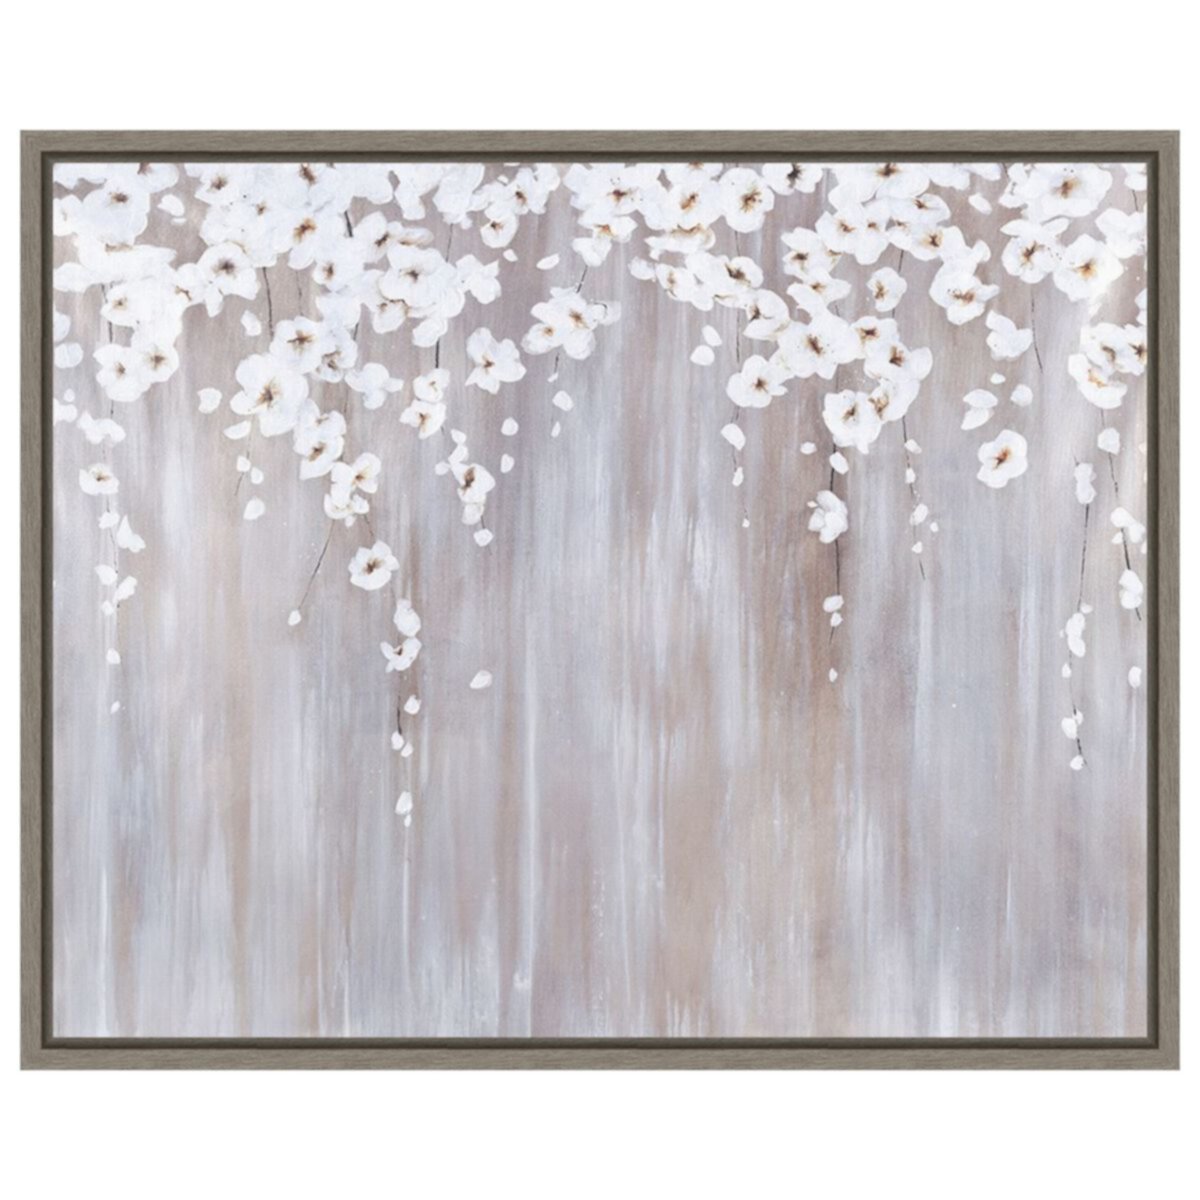 White Cherry Blossoms By Sydney Edmunds Framed Canvas Wall Art Print Amanti Home